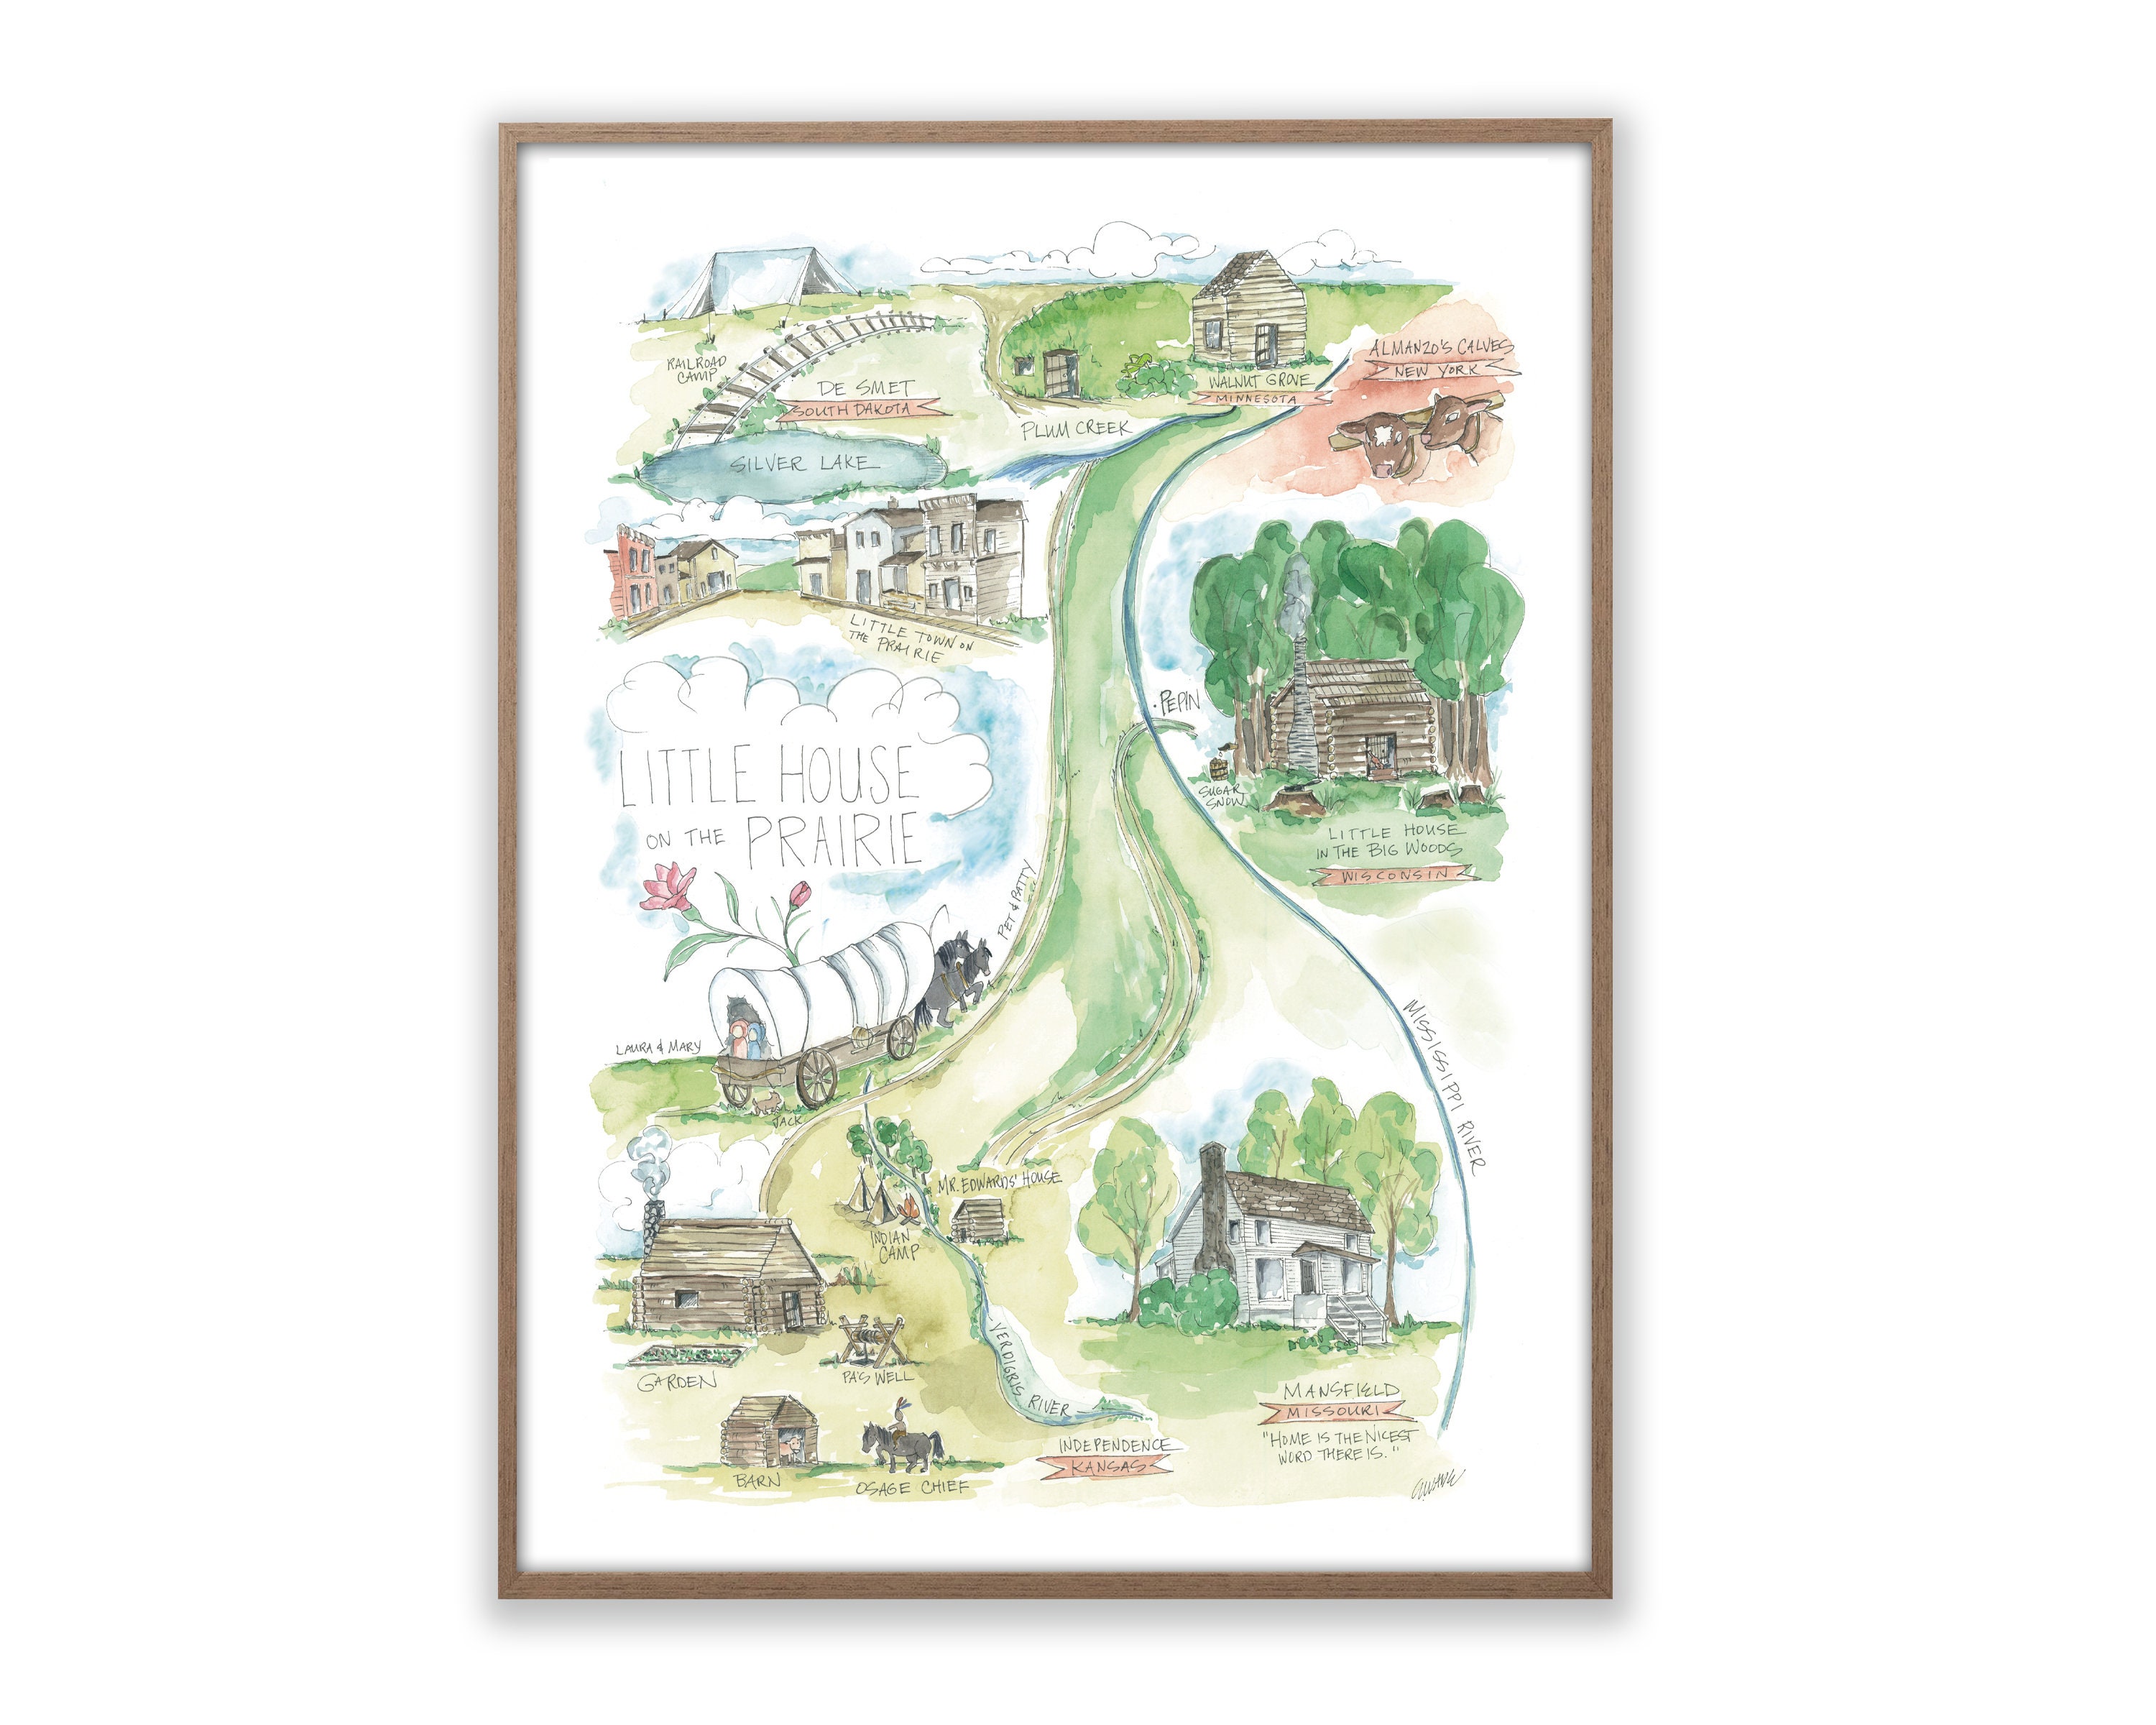 Laura Ingalls Little House on the Prairie Watercolor Map image